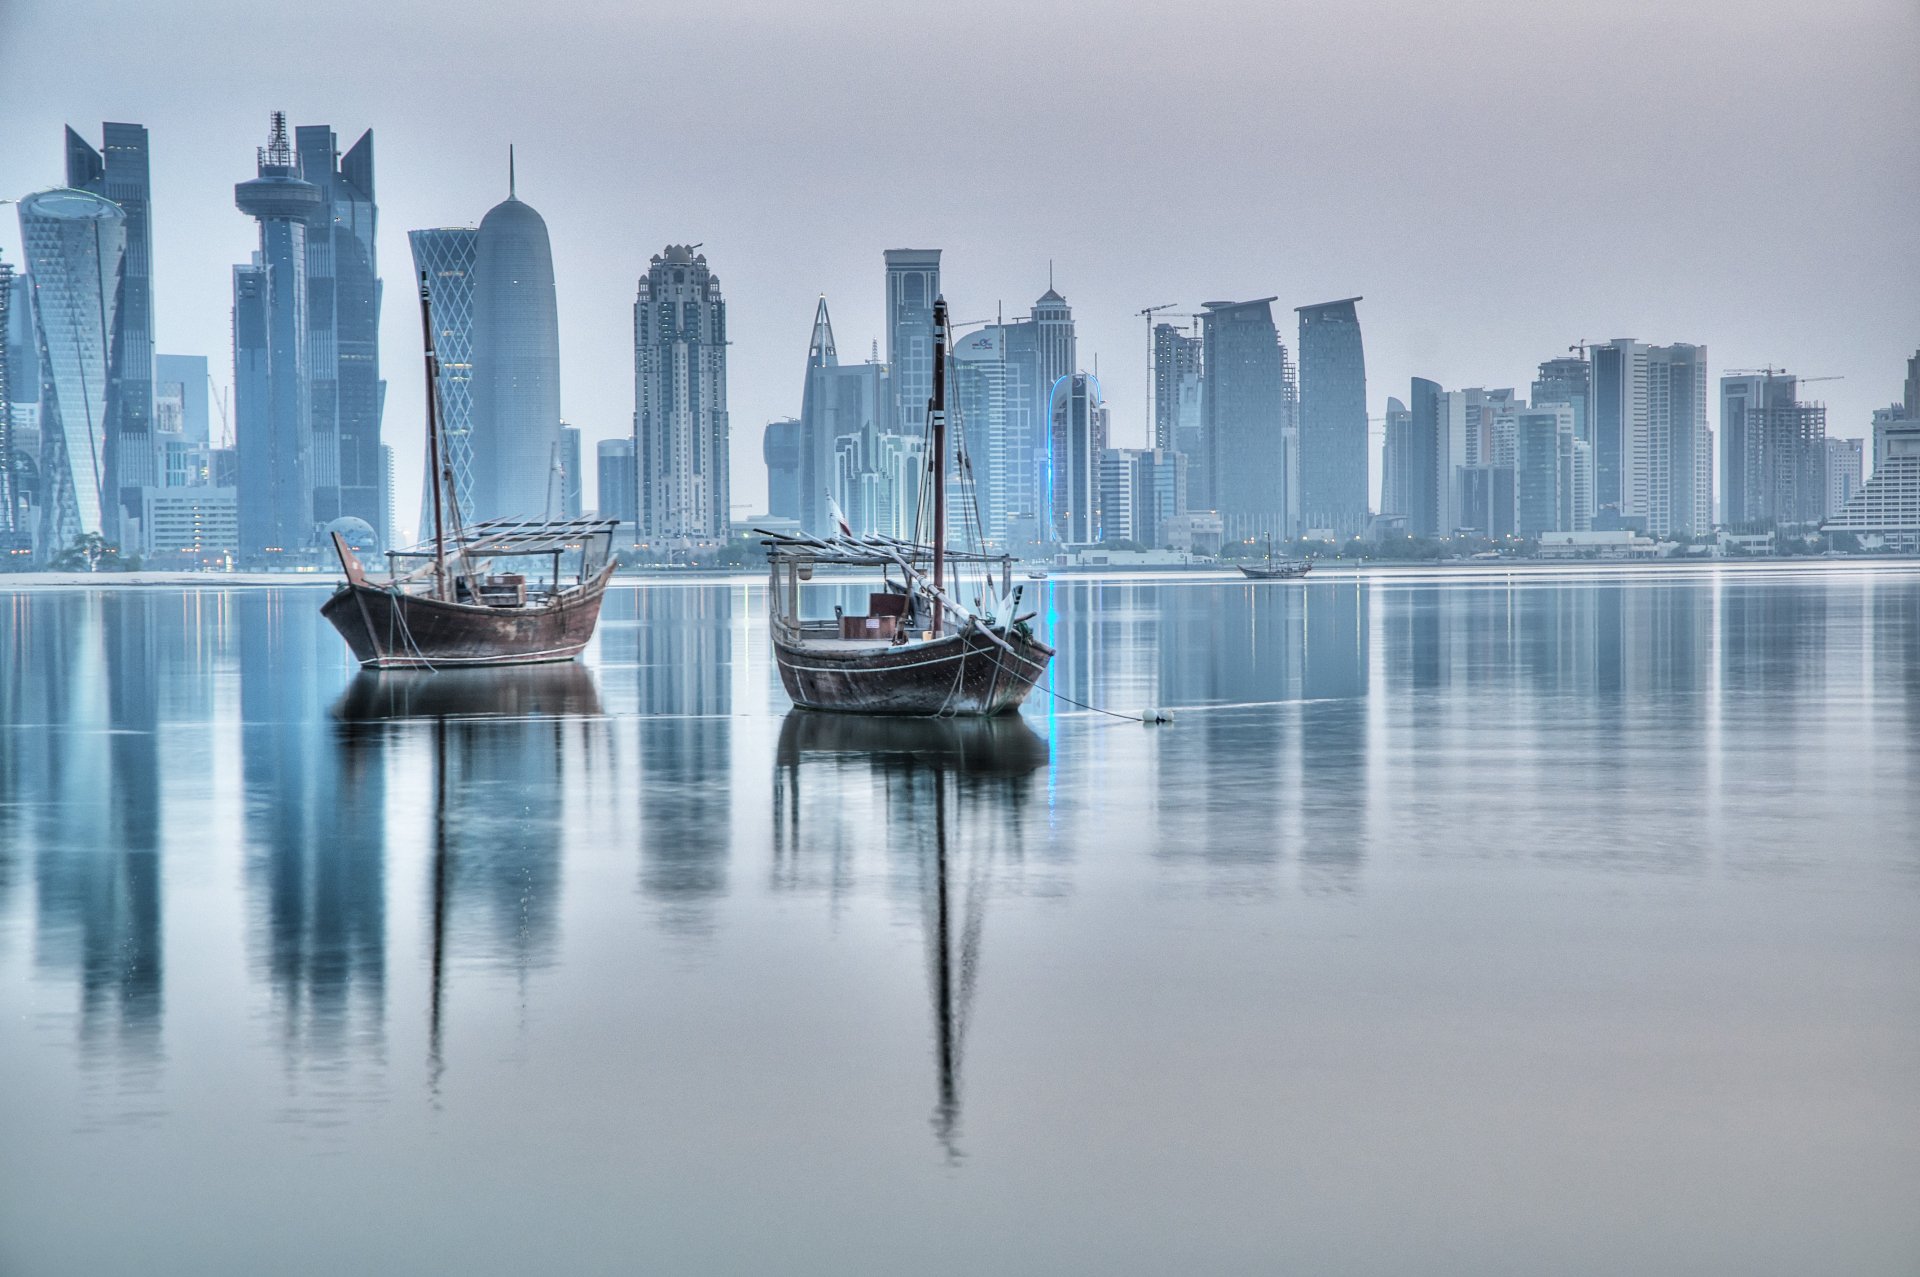 Doha 4k Ultra HD Wallpaper and Background Image | 4277x2845 | ID:555104